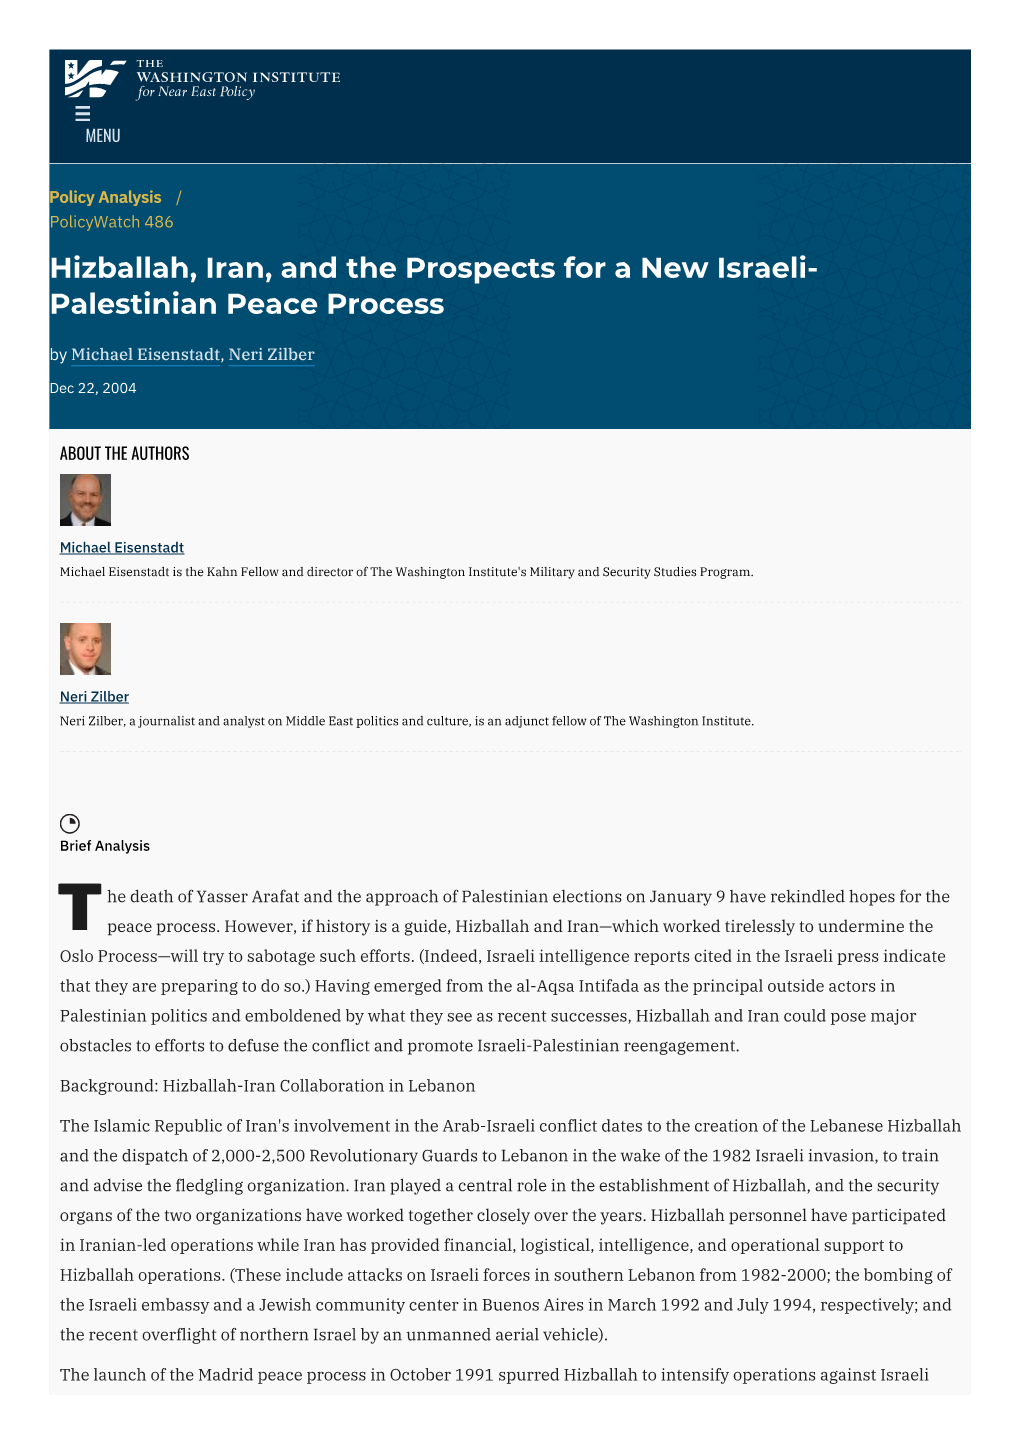 Hizballah, Iran, and the Prospects for a New Israeli-Palestinian Peace